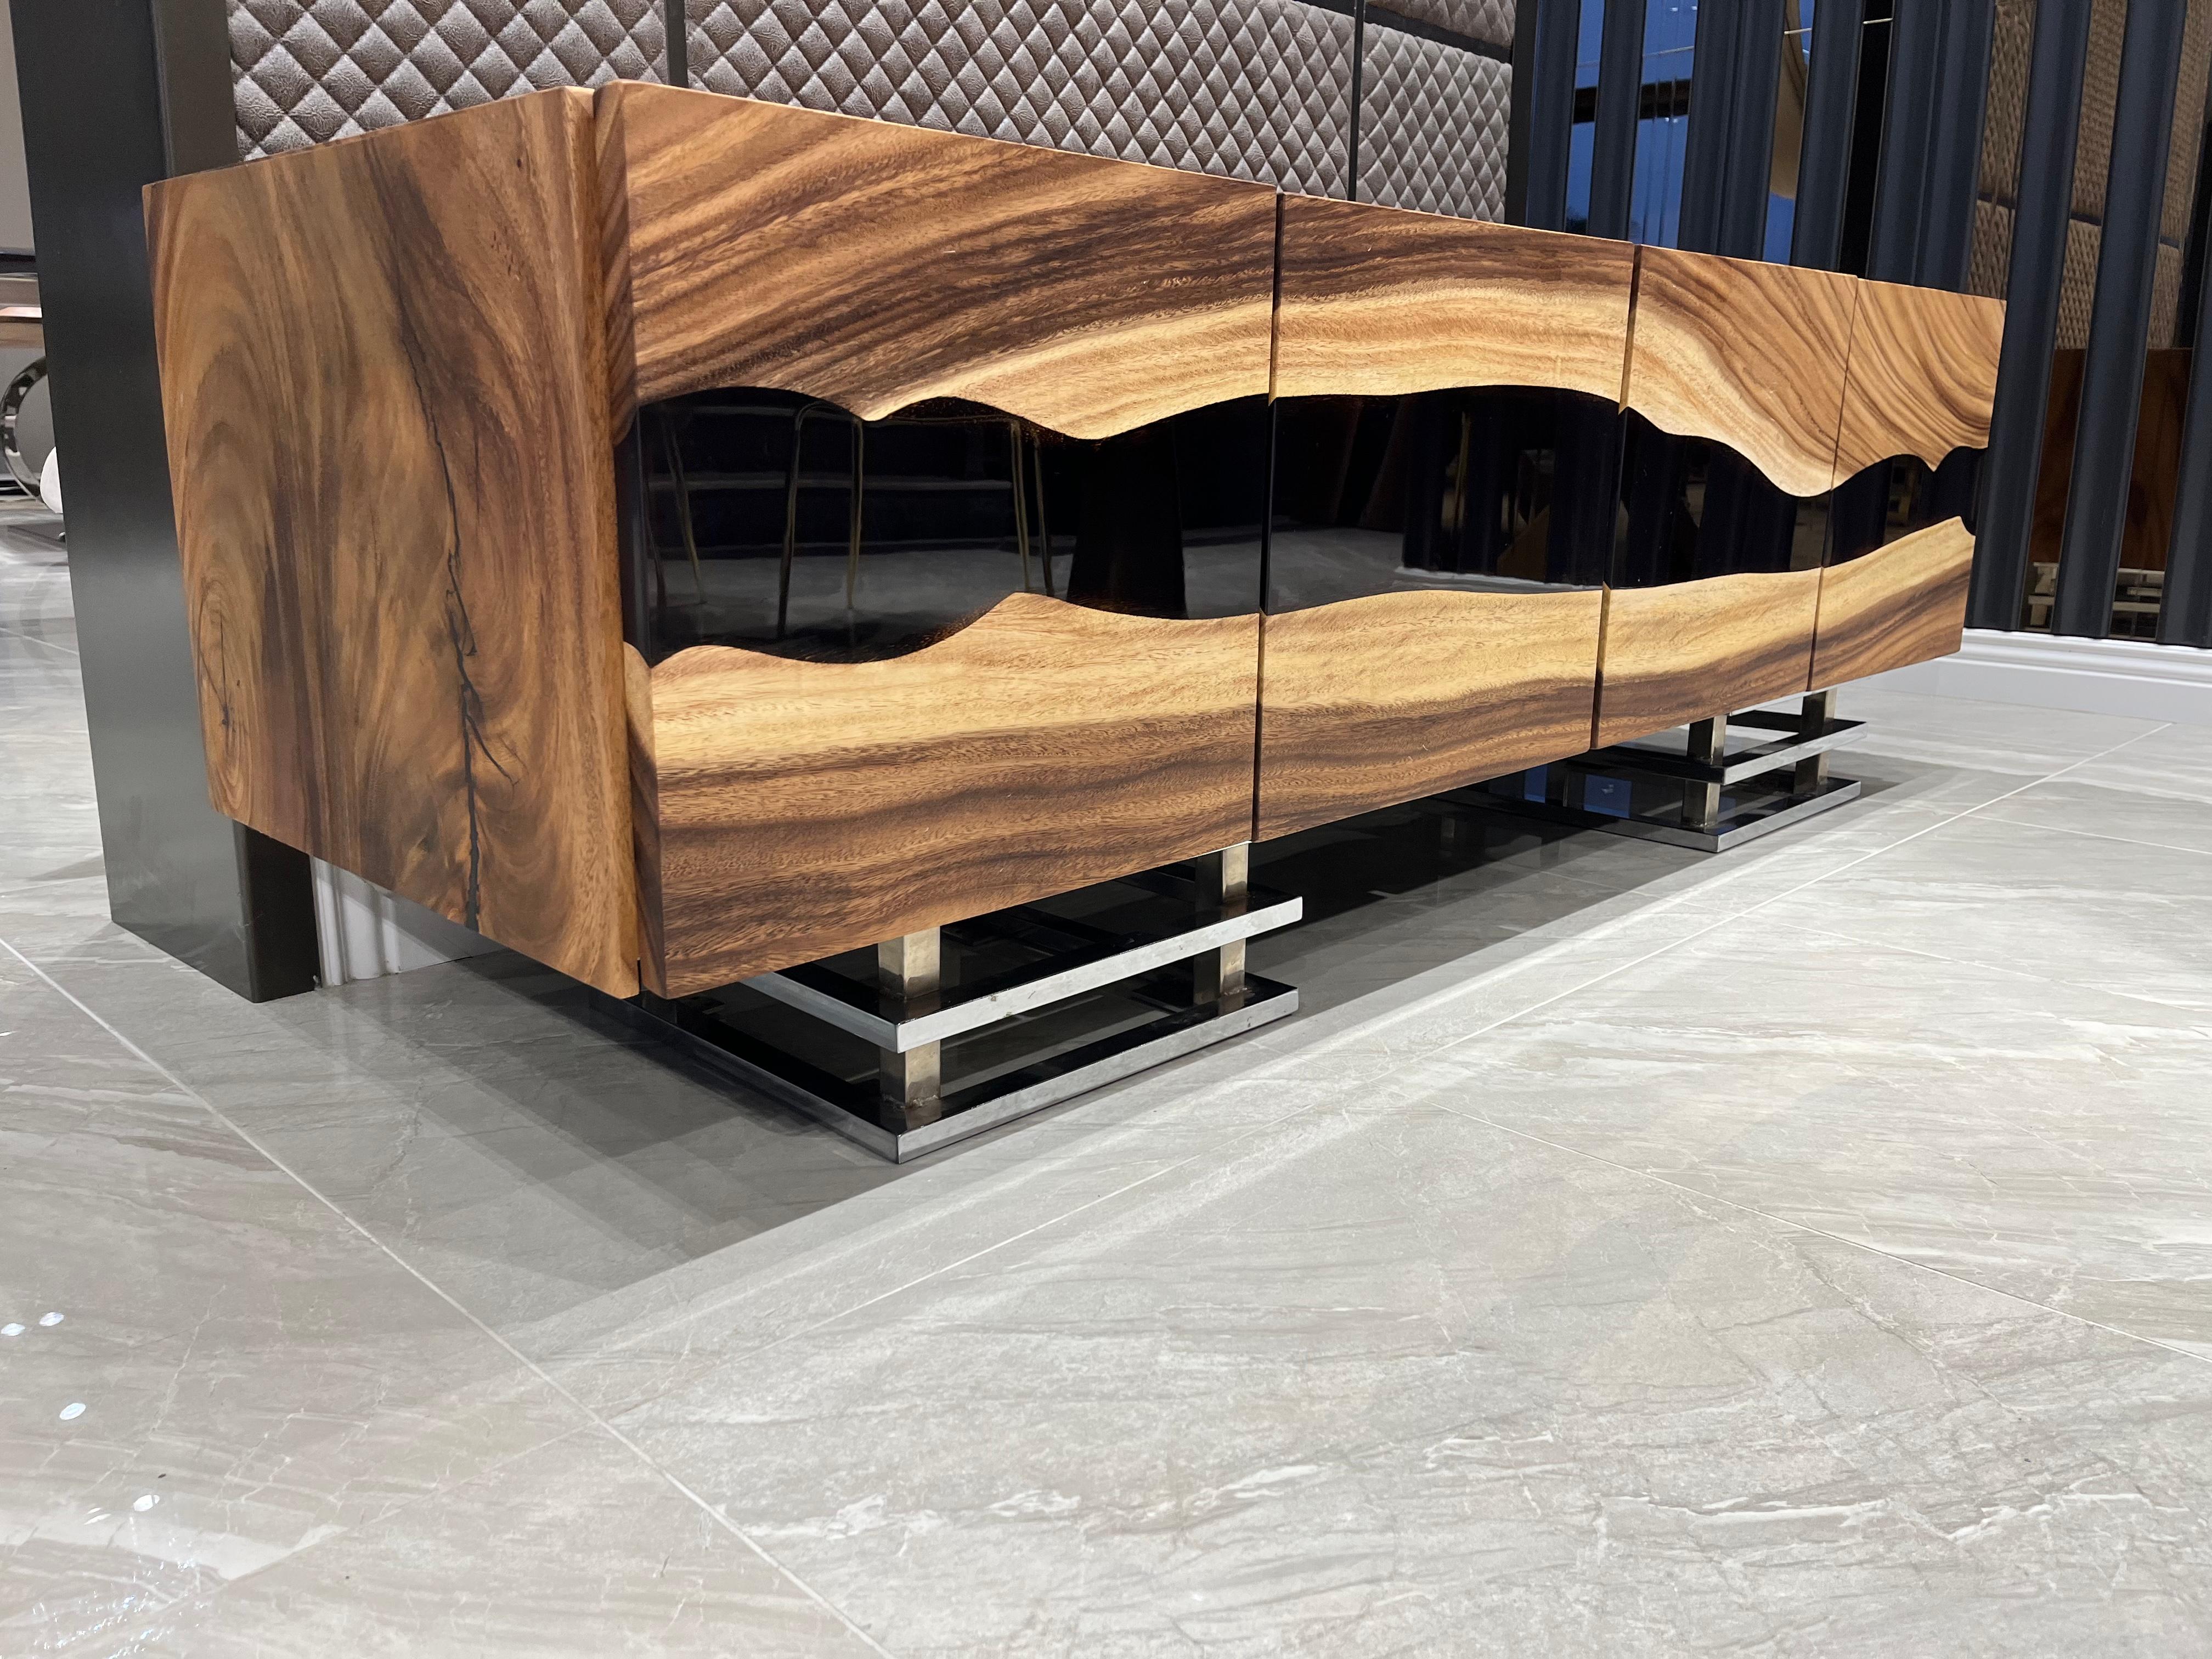 Custom Mappa Burl Sideboard & TV UNIT

The sideboard is made of natural mappa burl wood. This piece can be customized in any size or colour you wish! 

For more informations, please contact us!